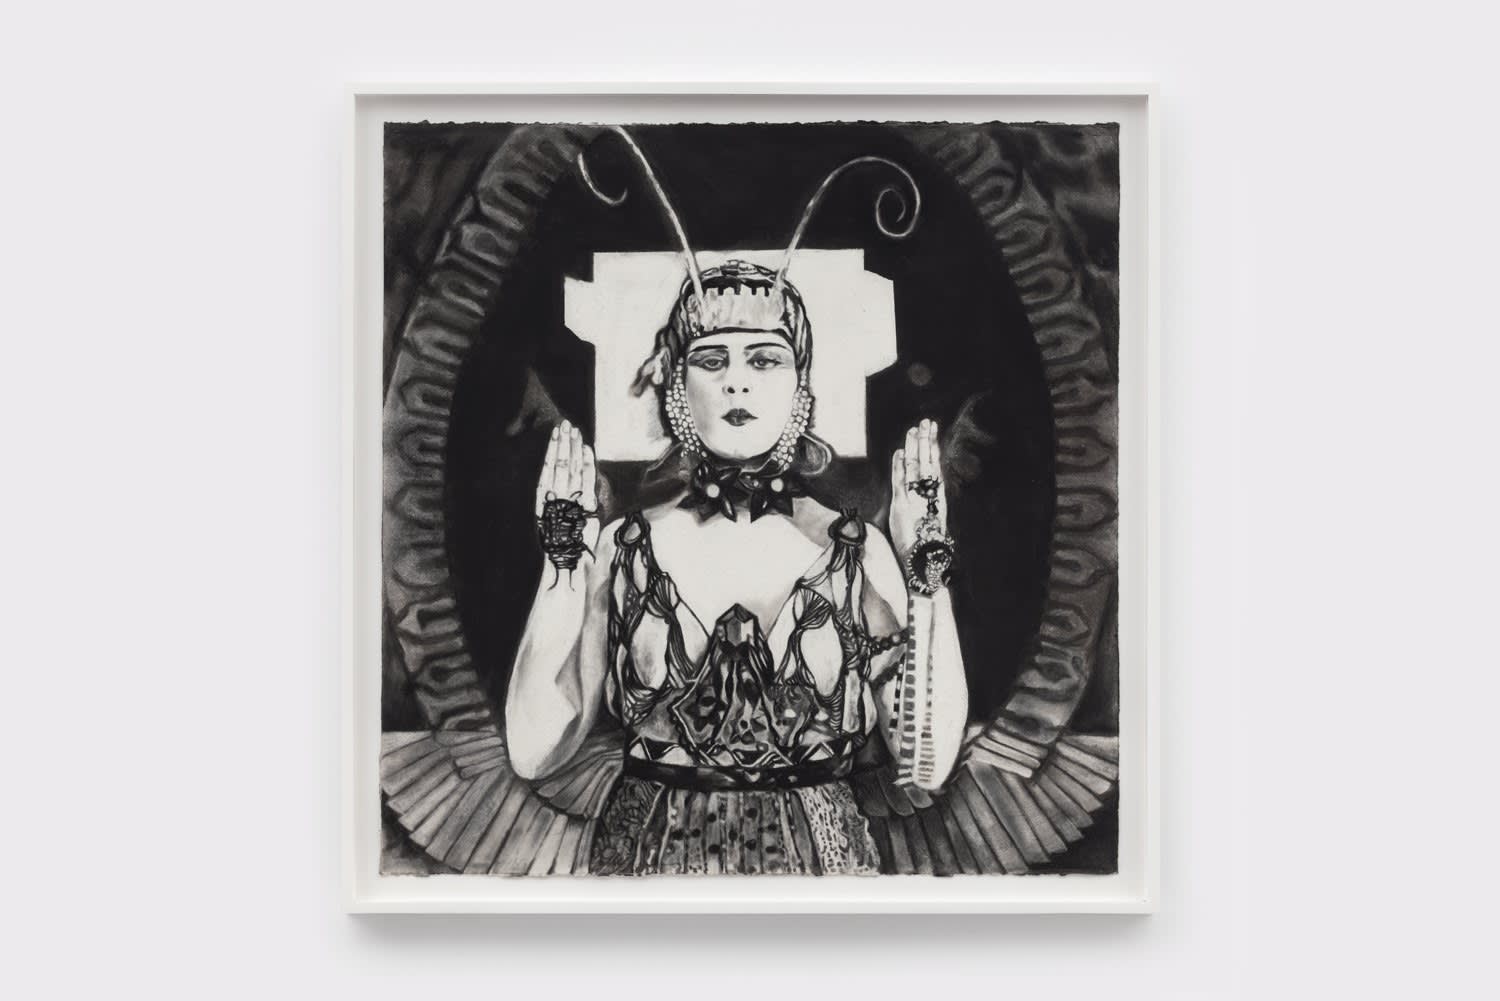 Chitra Ganesh, Ant Queen/Cleopatra, 2012